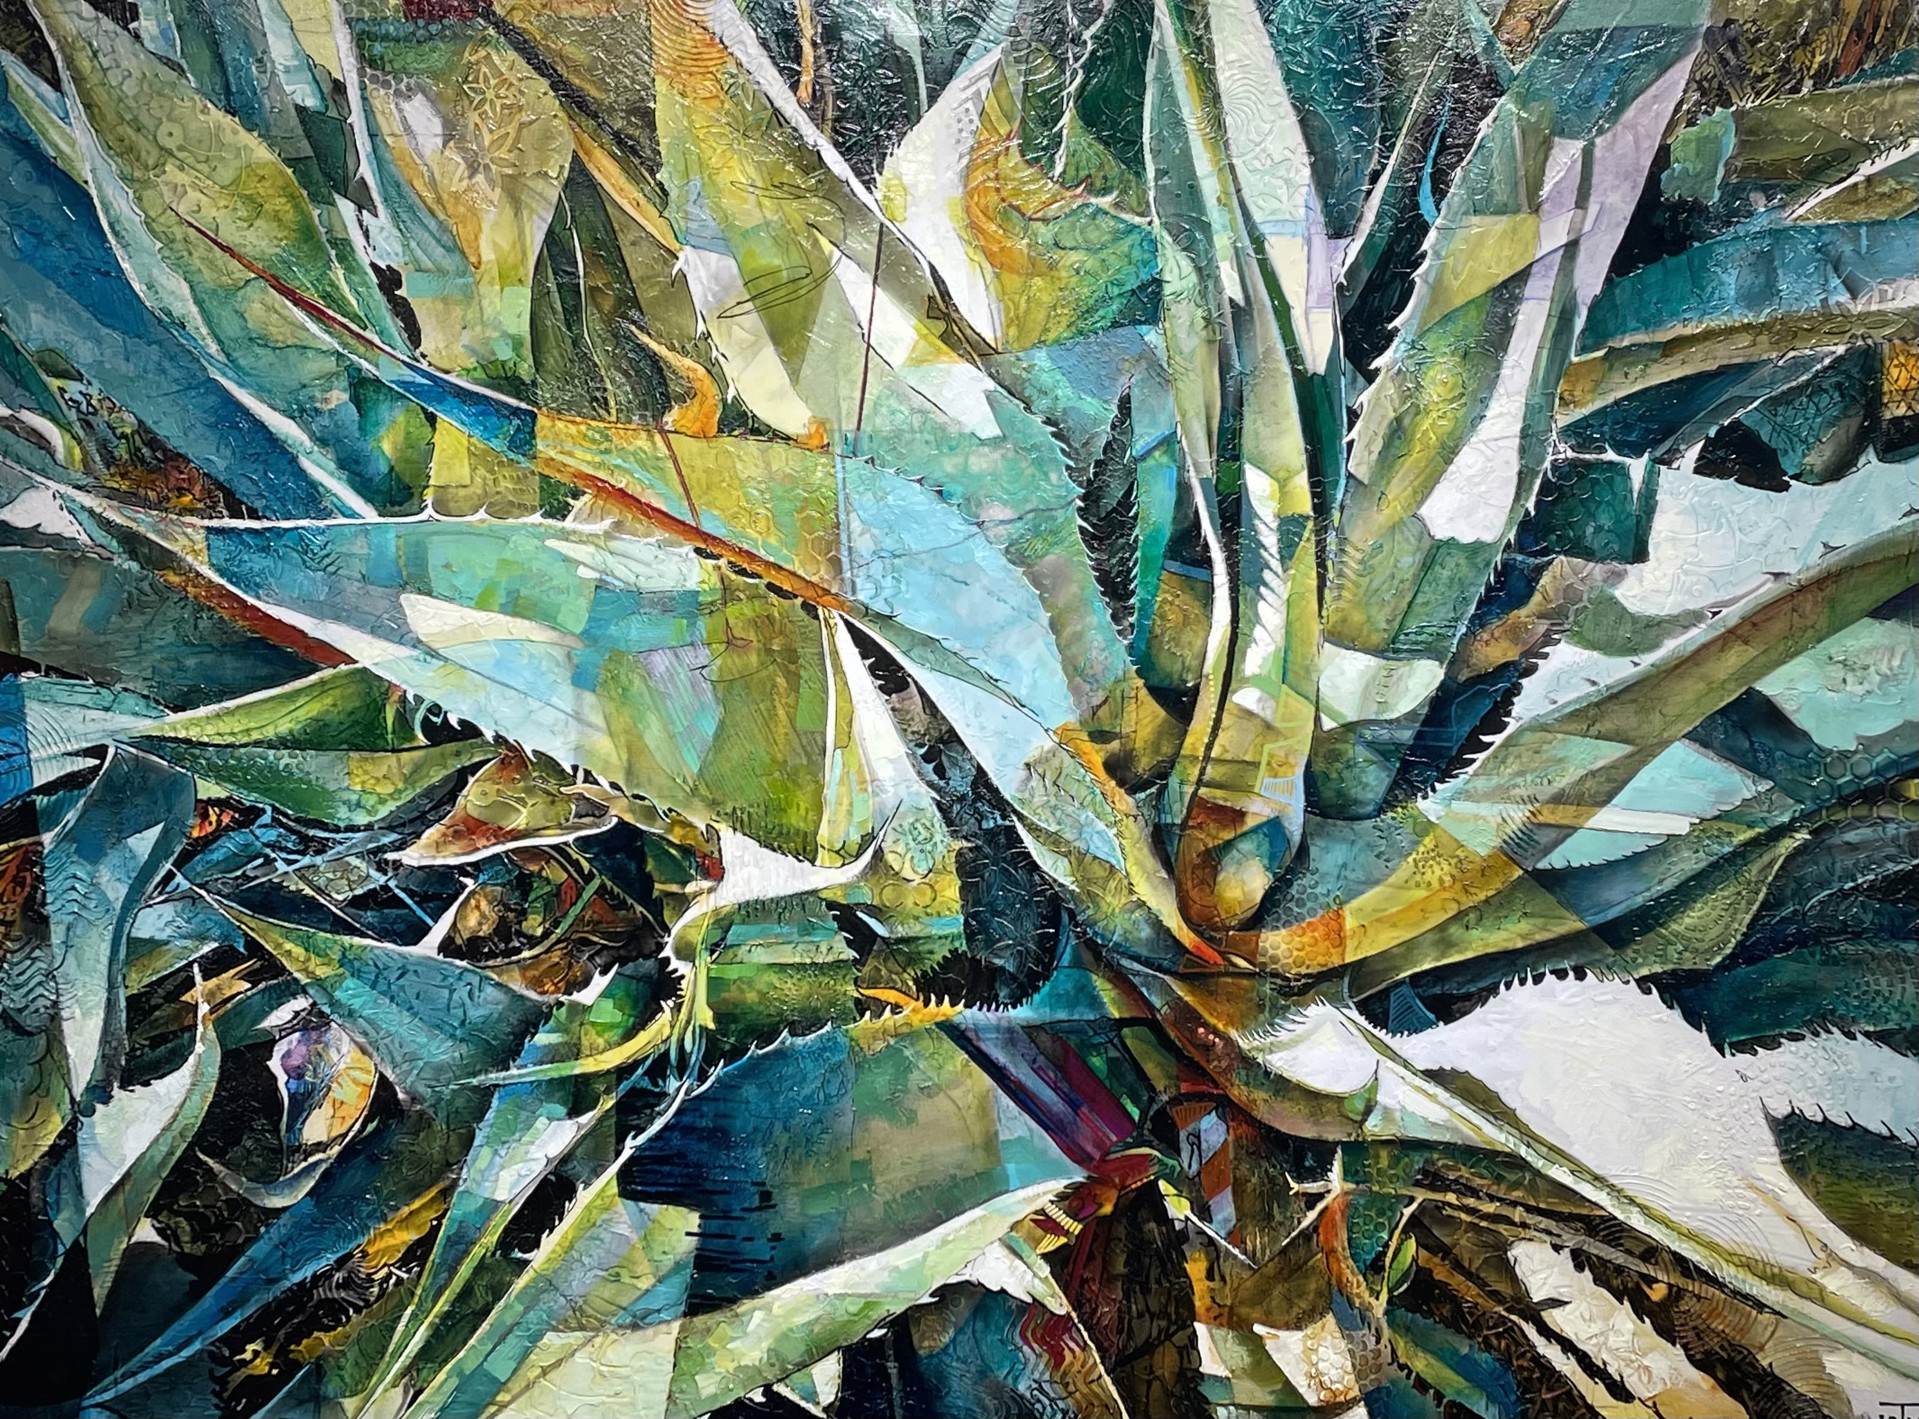 At the Heart of an Agave by Jon Wassom